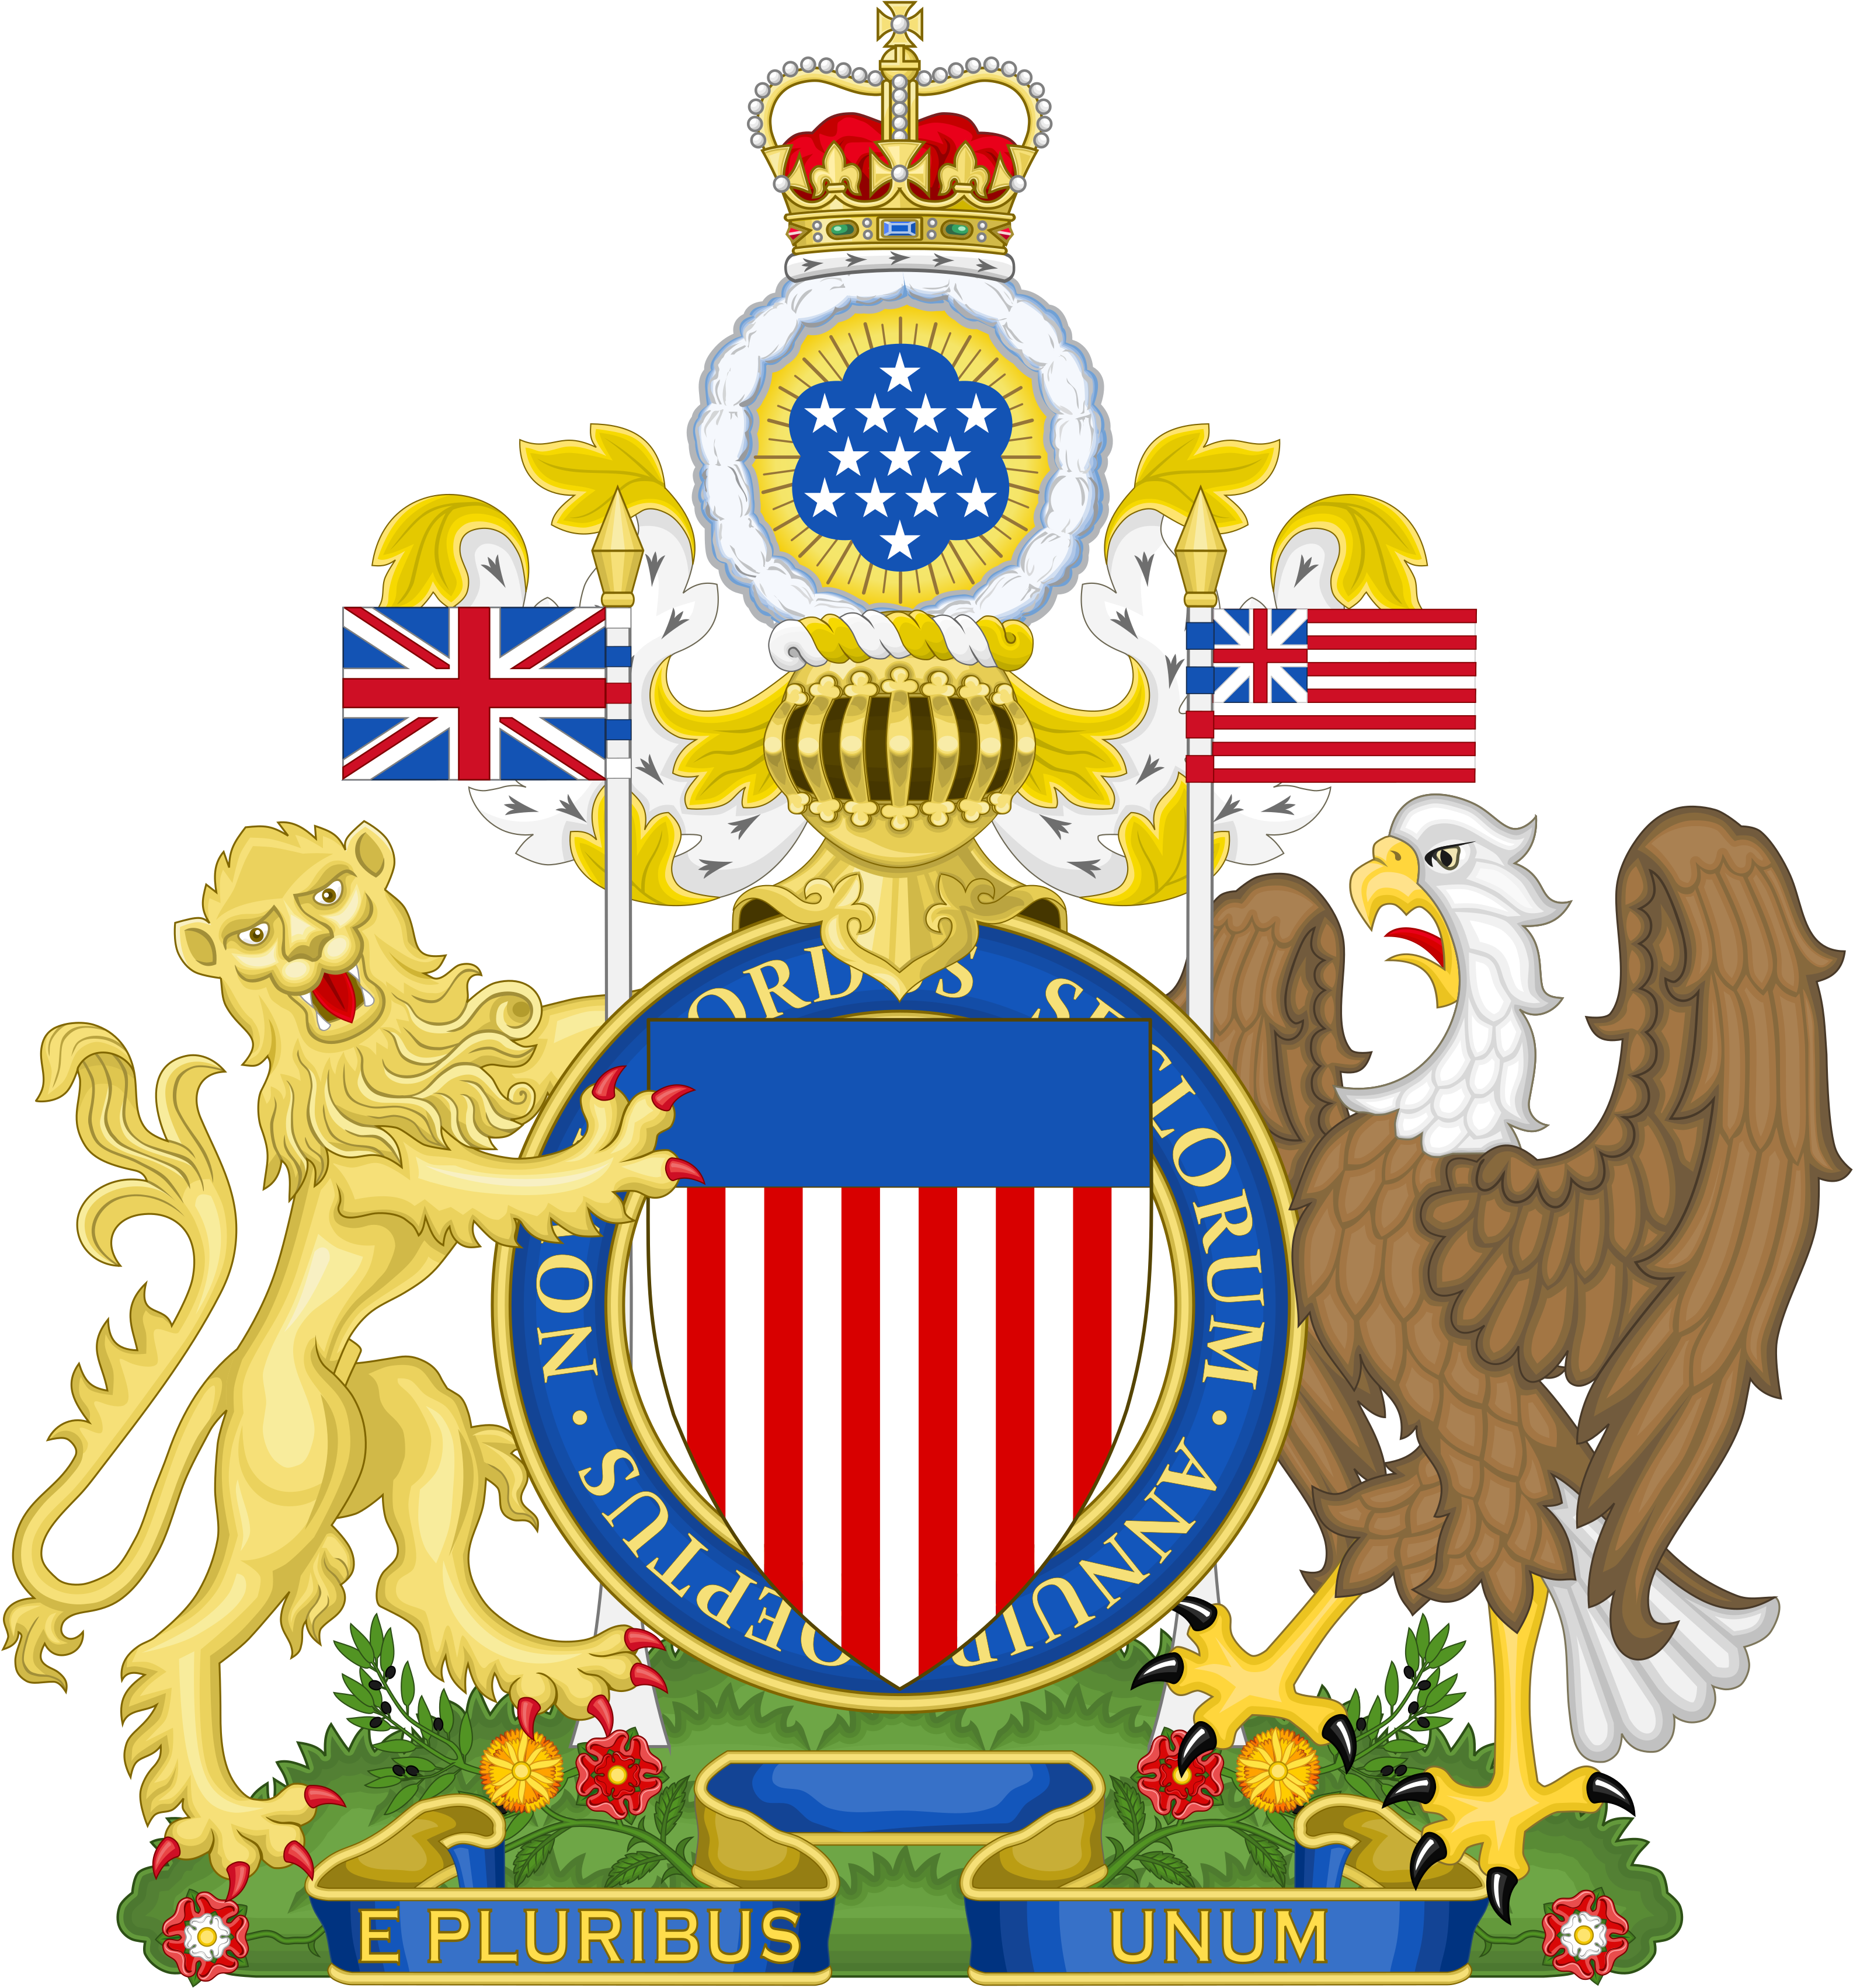 Occoat Of Arms Of The United States If It Was A Commonwealth - Royal Coat Of Arms (3494x3494)